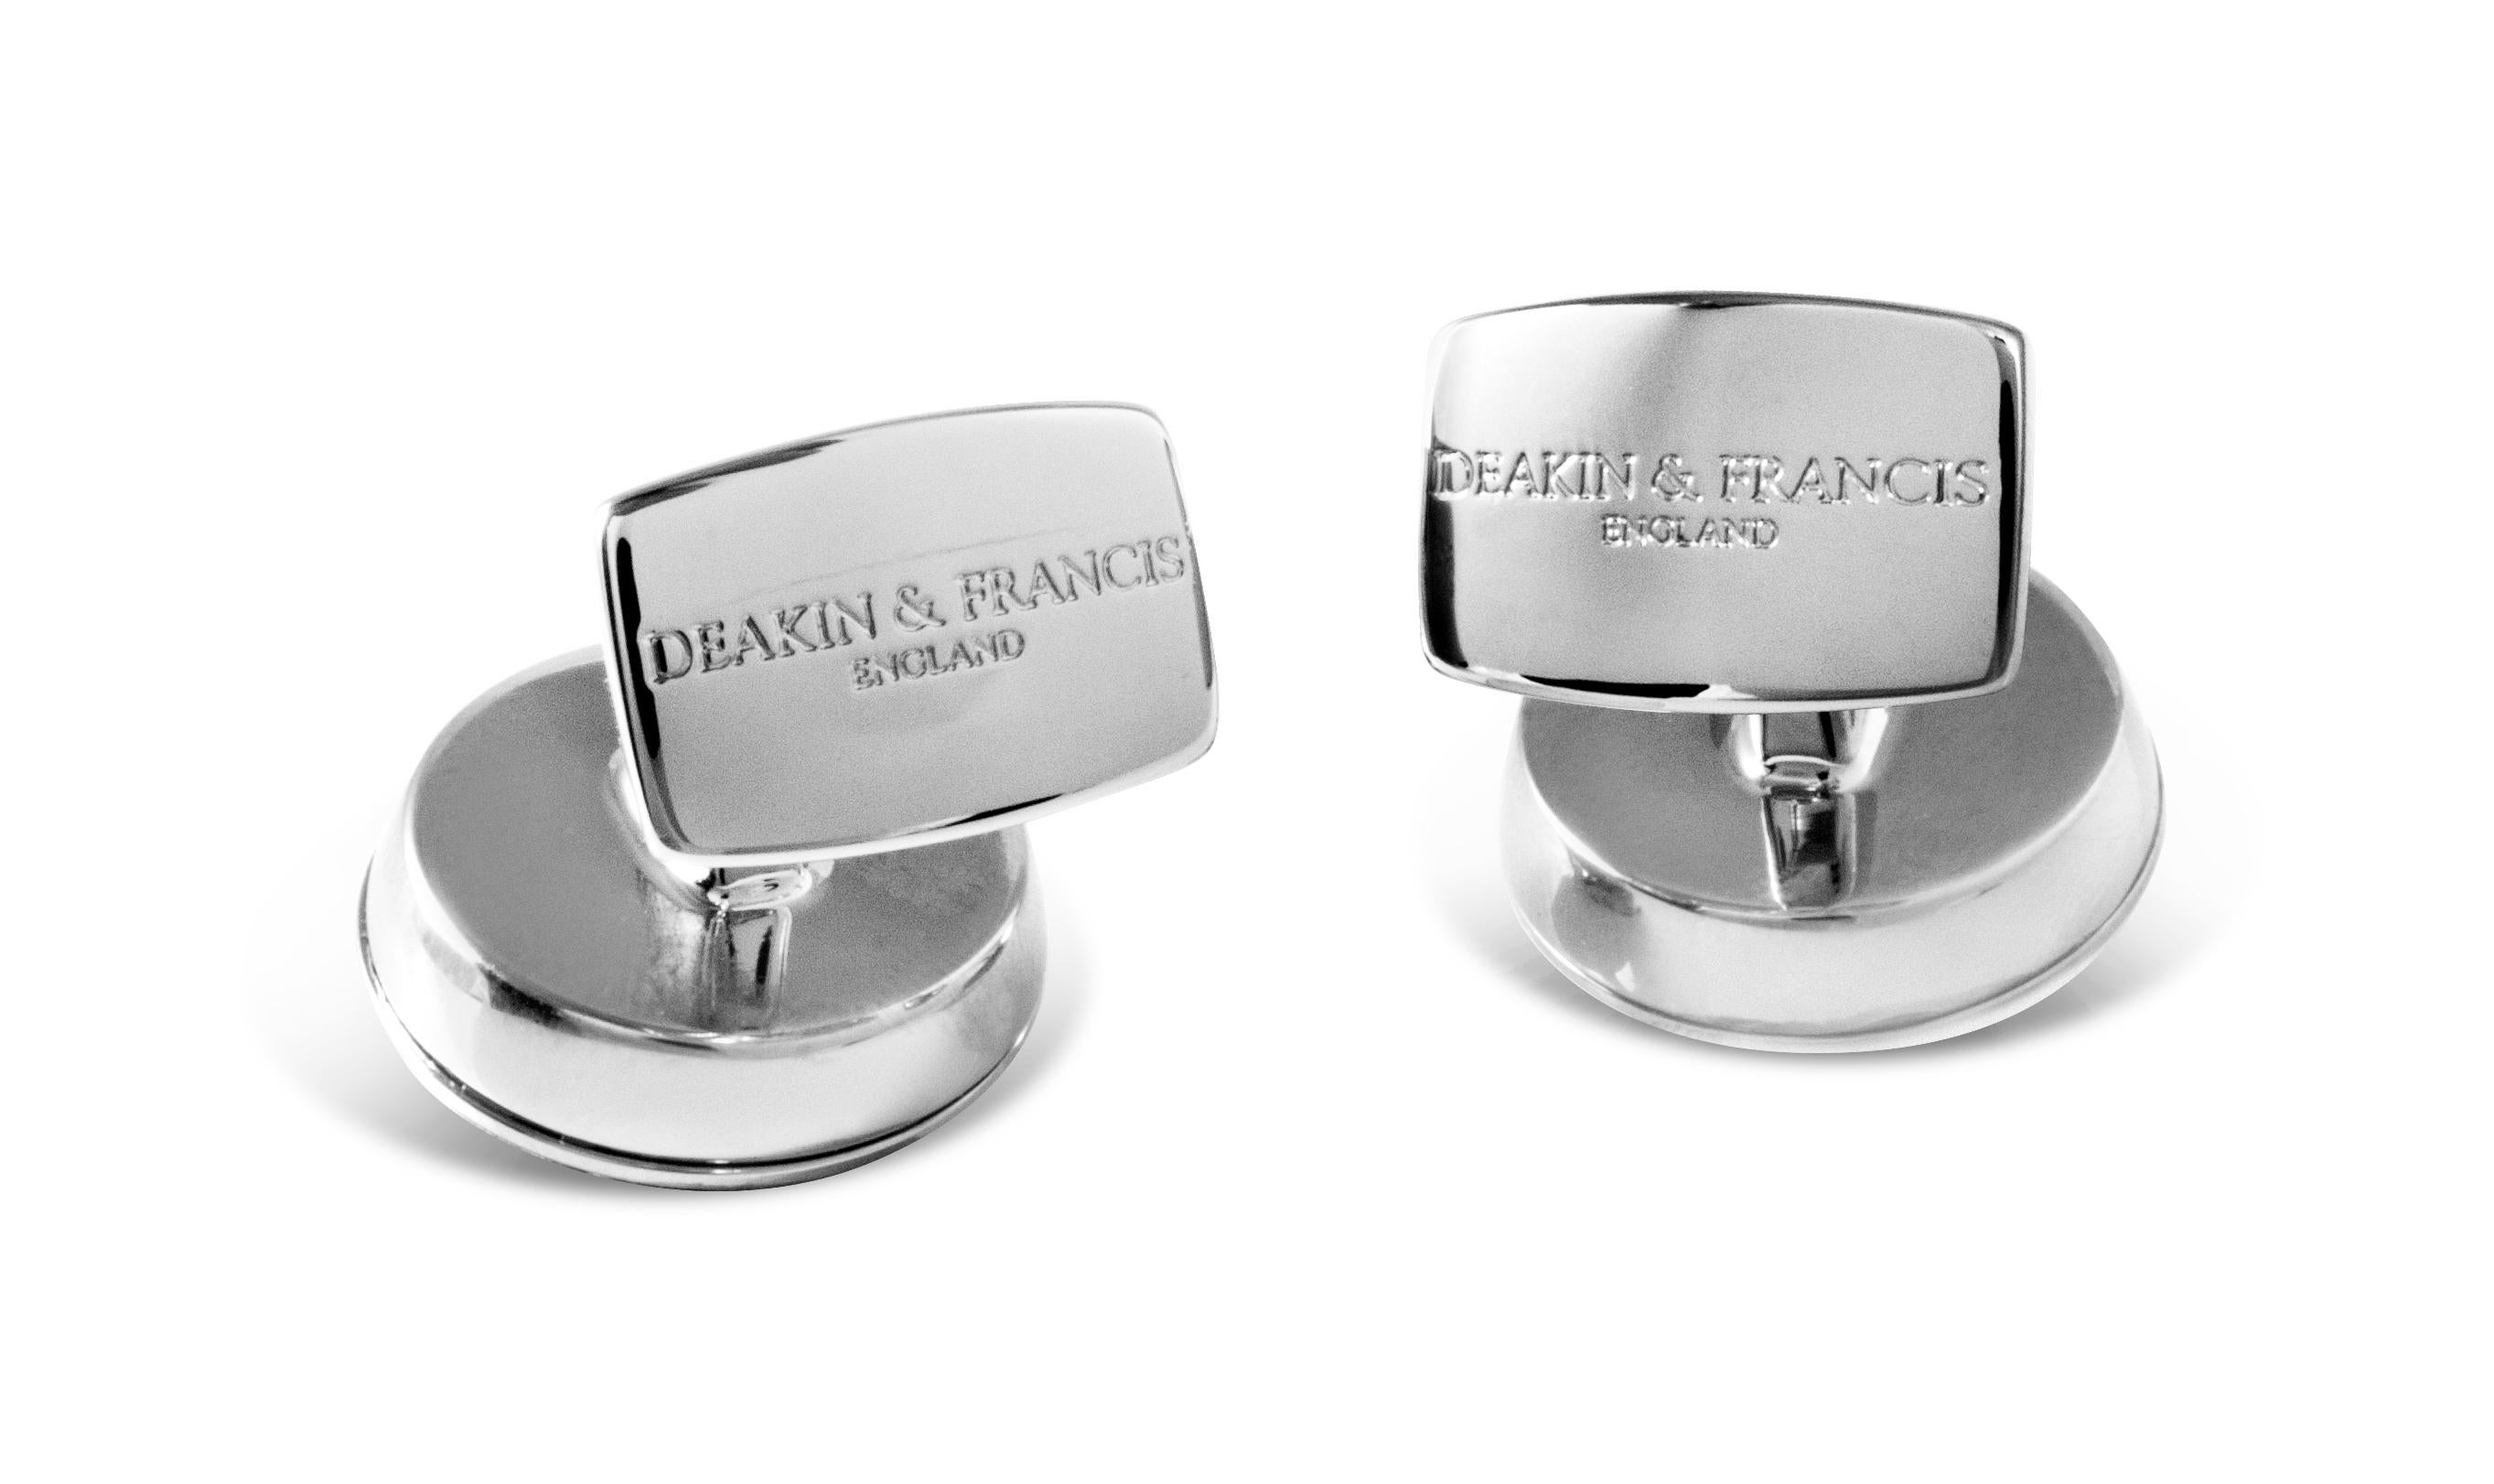 DEAKIN & FRANCIS, Piccadilly Arcade, London

No collection would be complete without the iconic Deakin & Francis skull!

With a smooth, satin finish, these cufflinks are literally jaw-dropping and upon doing so they reveal stunning, bright red